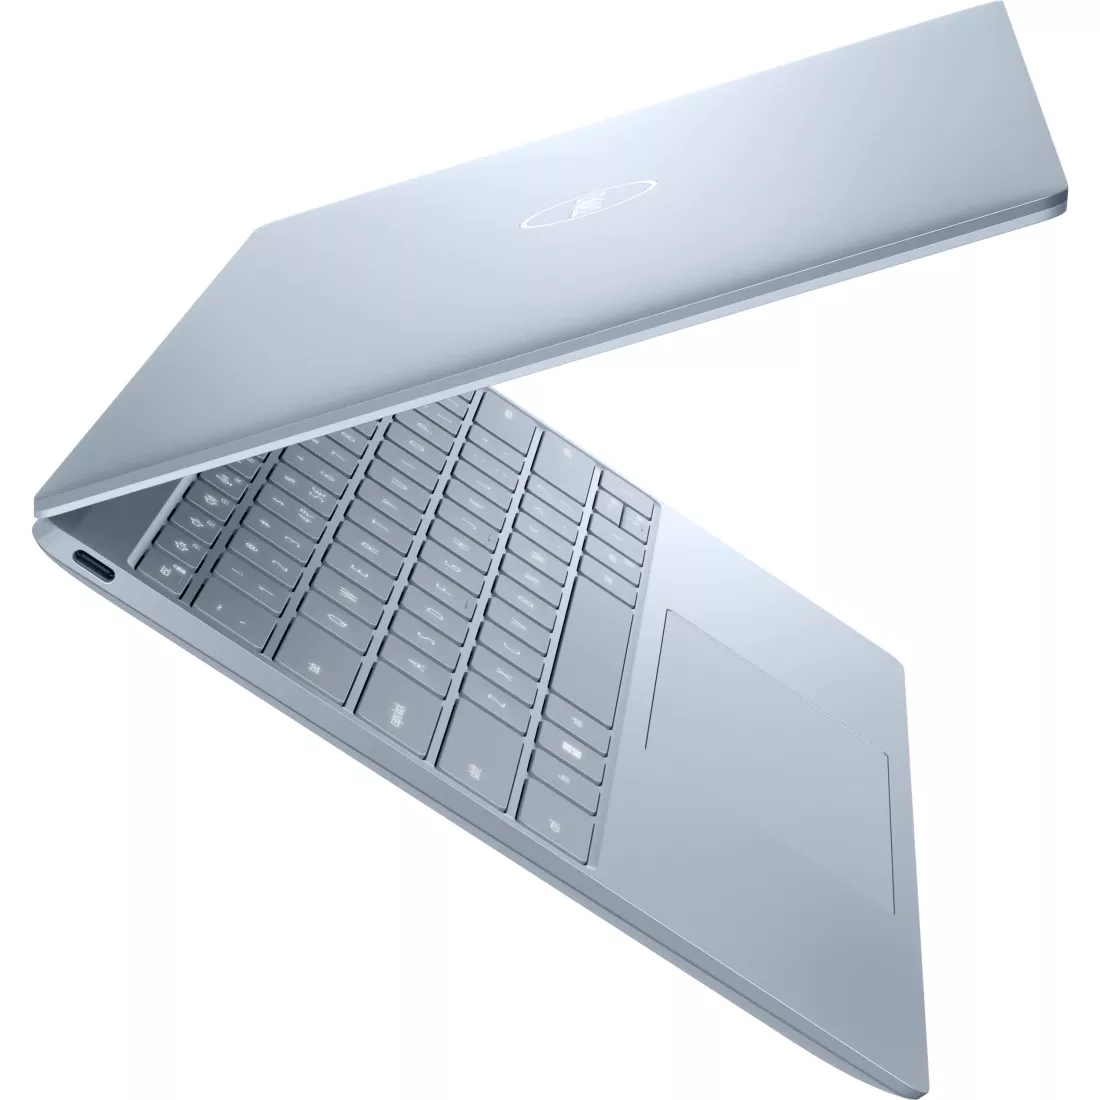 Dell XPS 13 (9315) - 2022